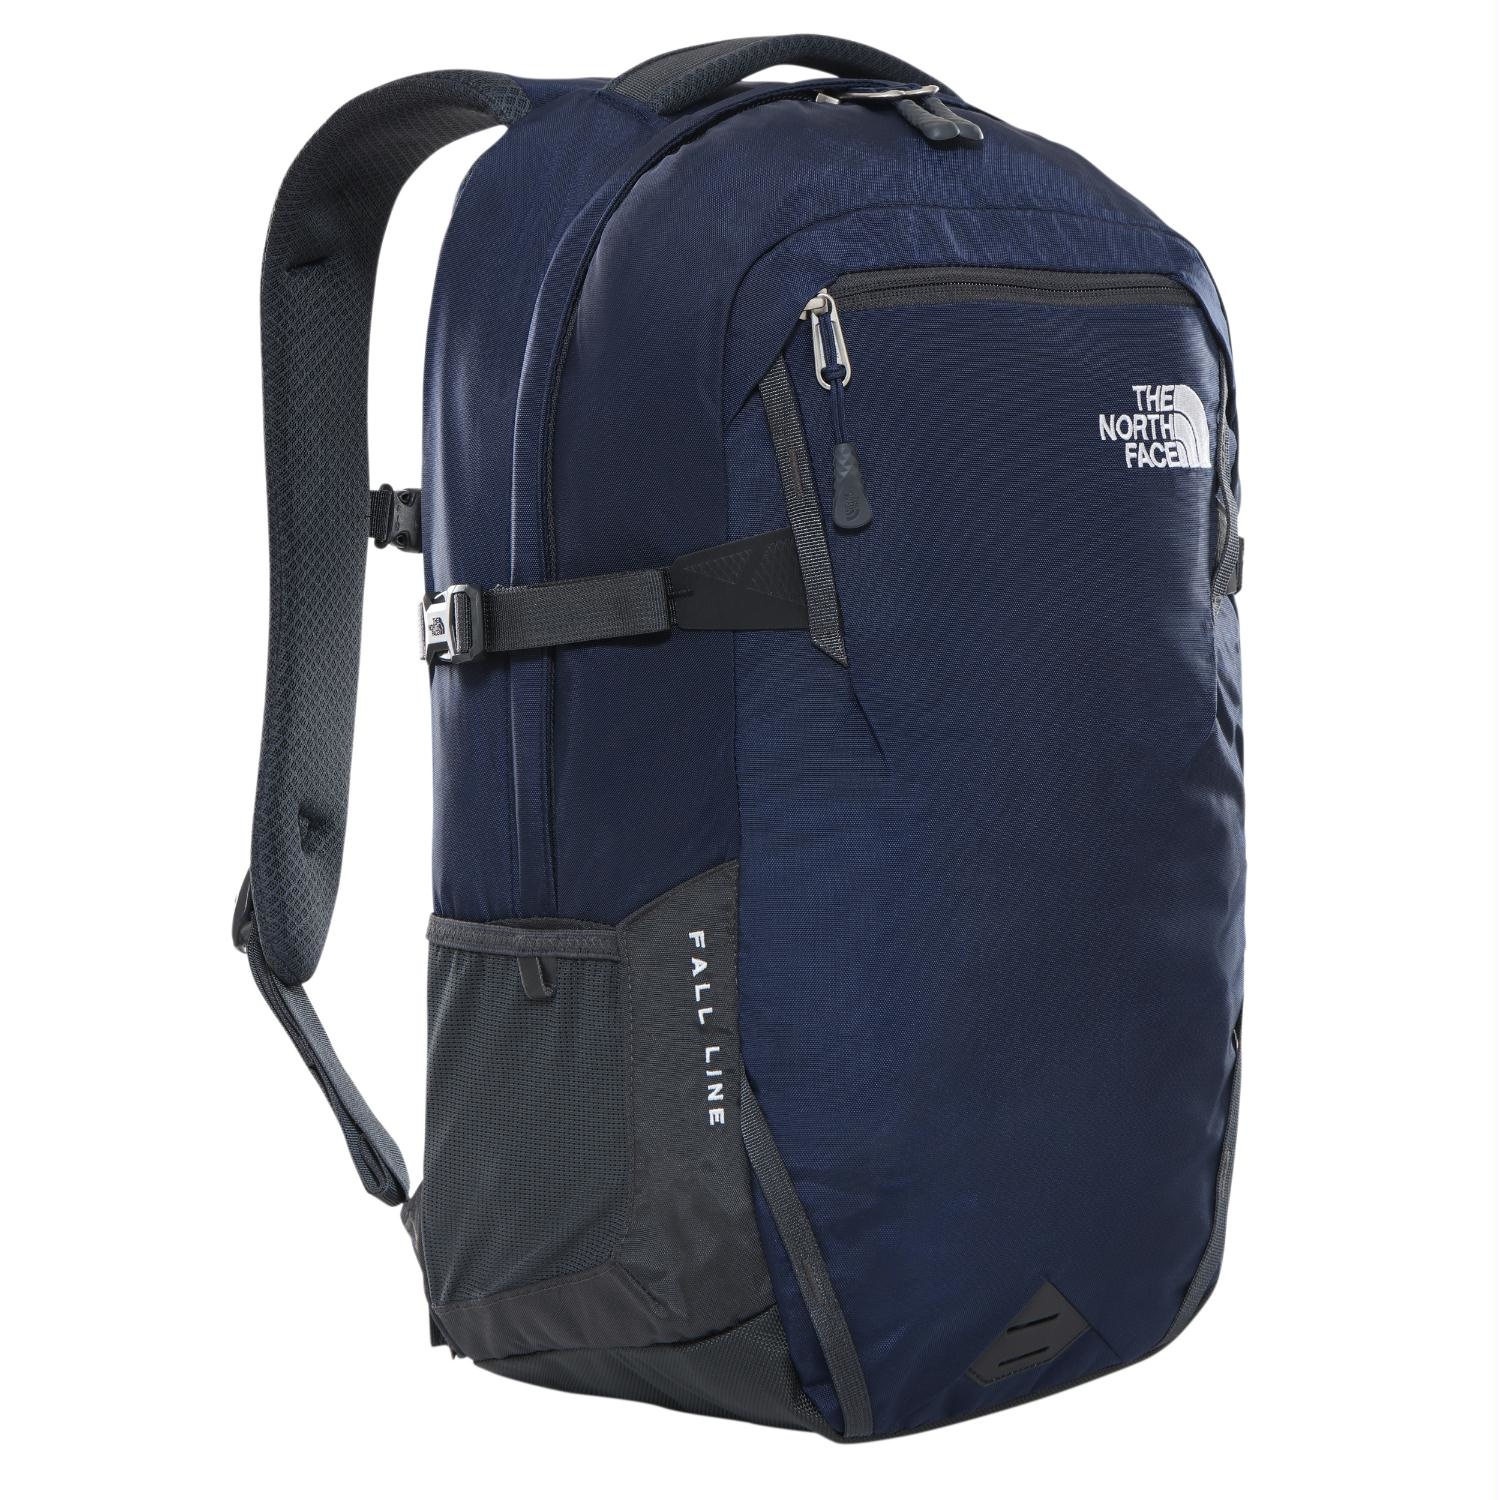 NORTH FACE NORTH FACE FALL 15'' BLAUW - Koffershop